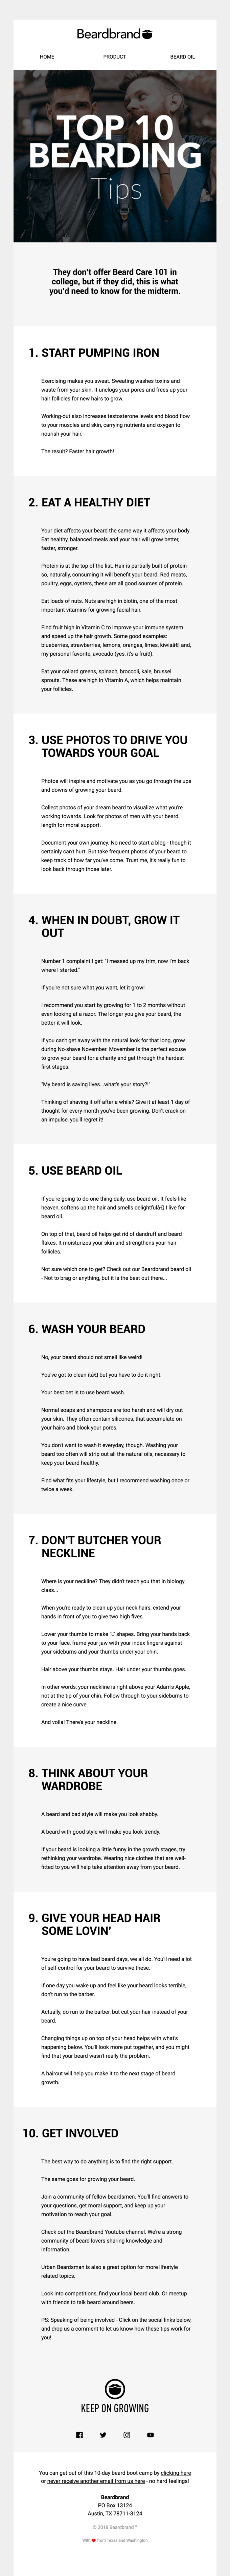 [Ten Bearding Tips] We put together the most valuable advice to grow your beard out